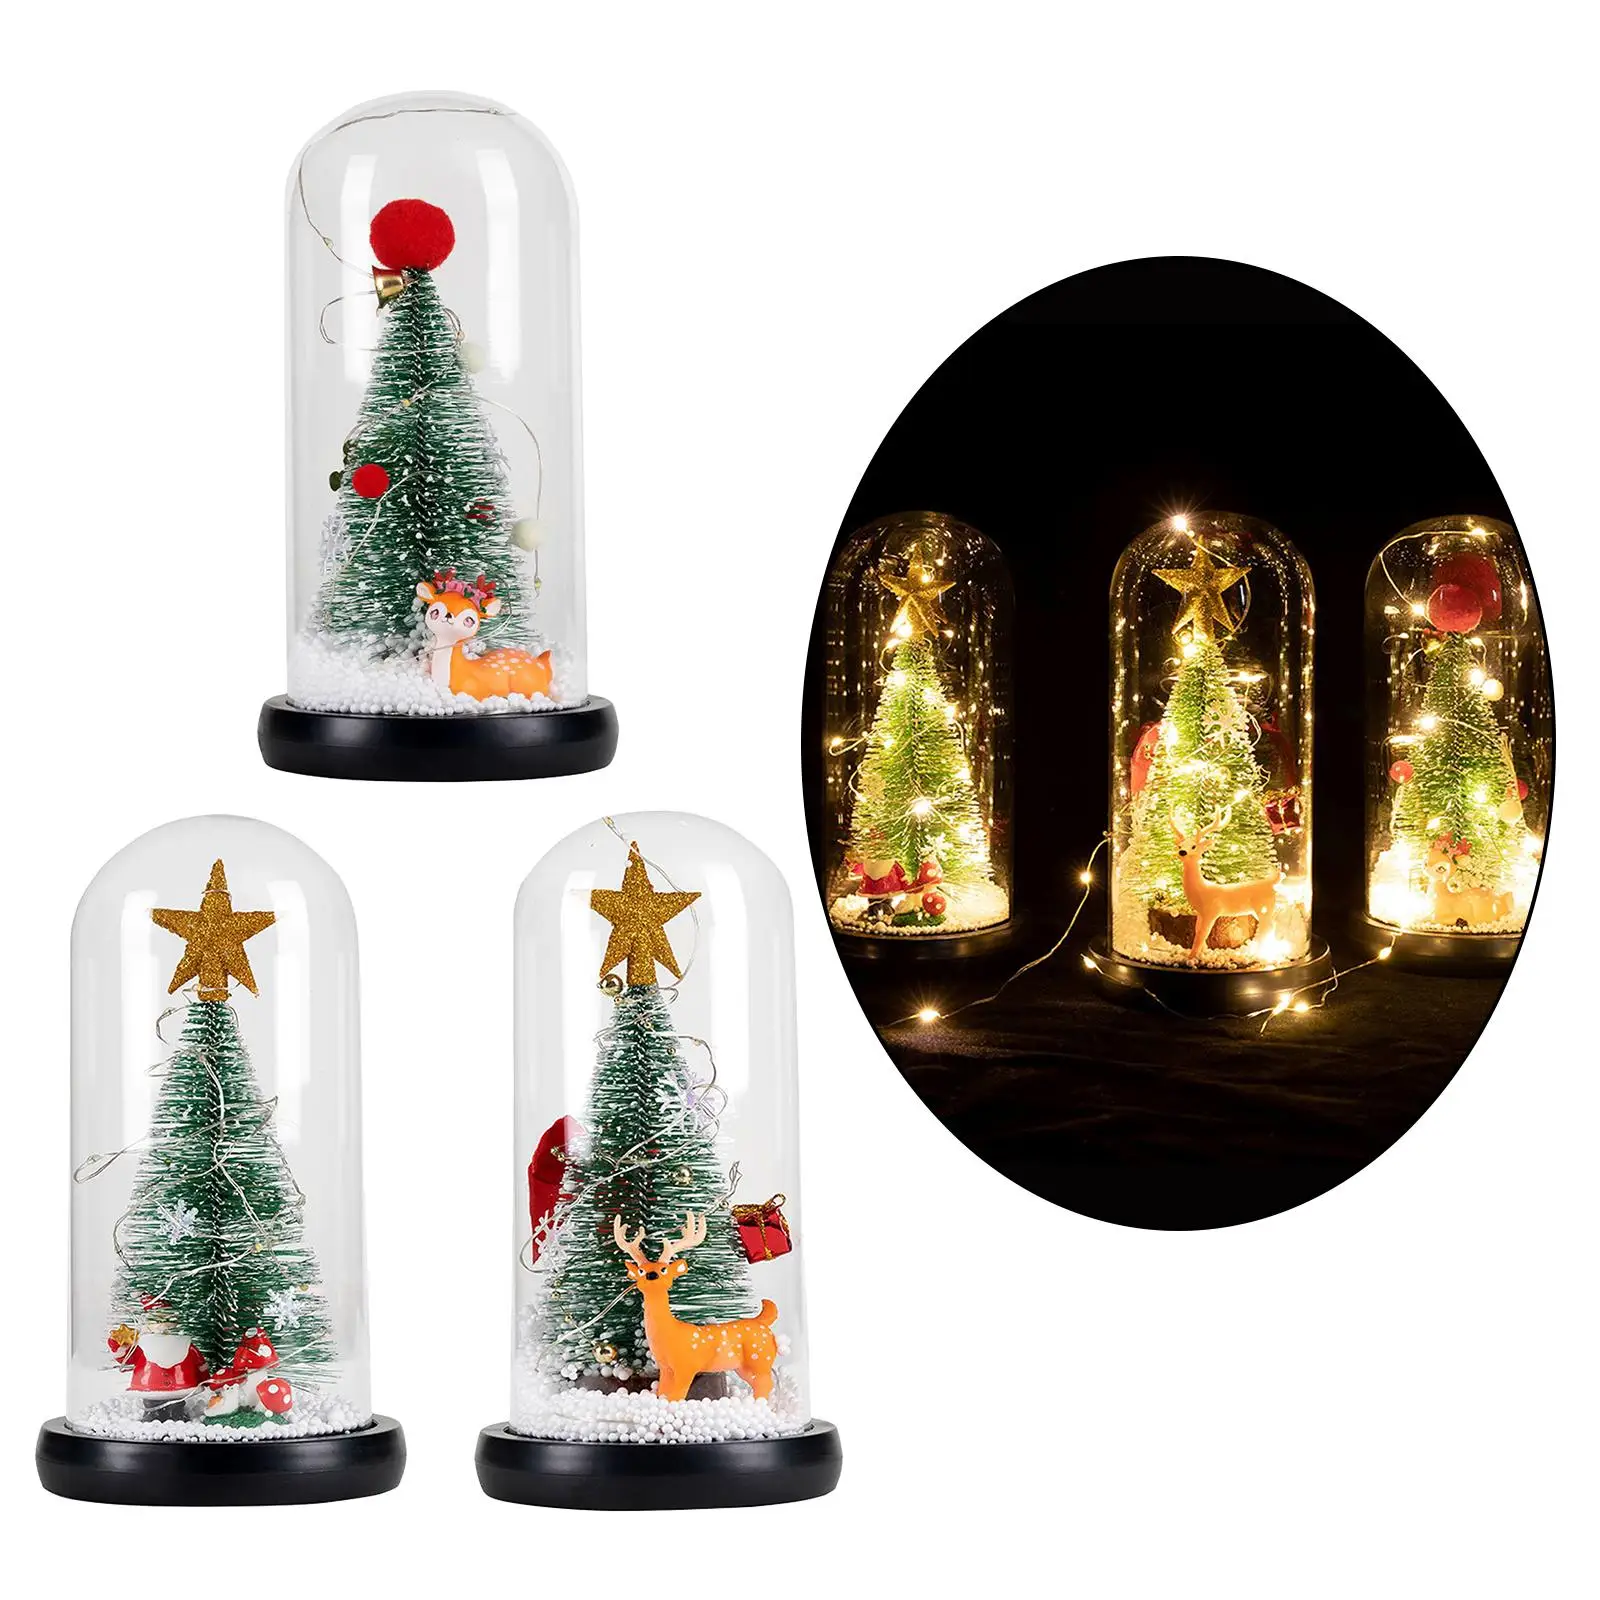 Christmas Dome with for Kids Boys Girls Family Friend Gifts, for room and home Bedroom Decor